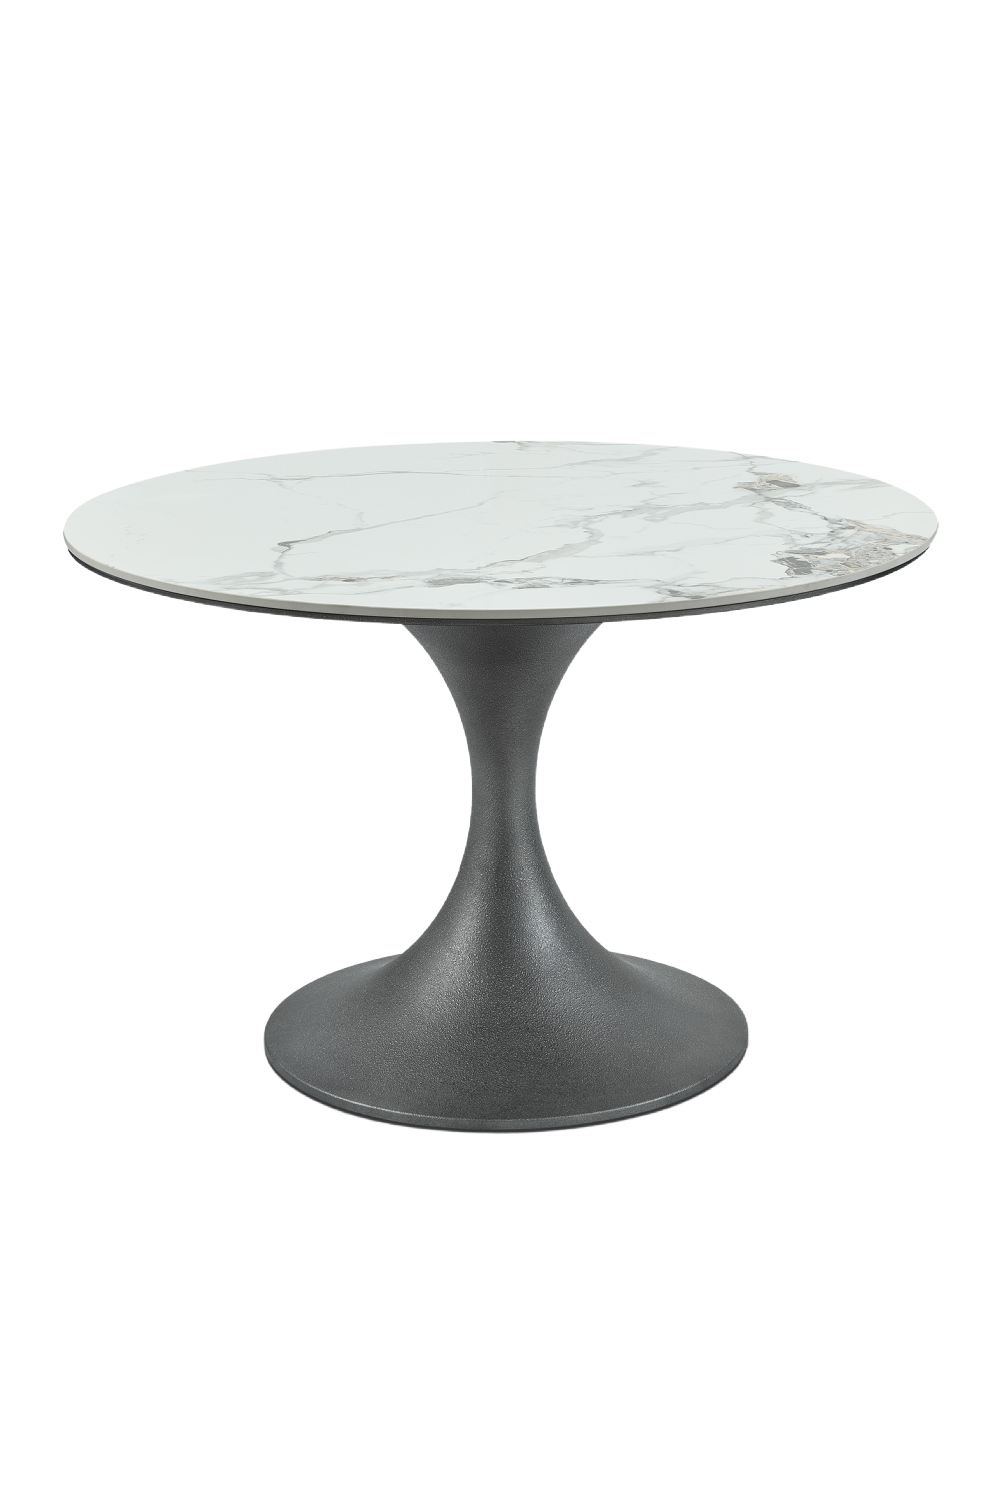 White Marble Pedestal Dining Table | Liang & Eimil Stella | Oroa.com